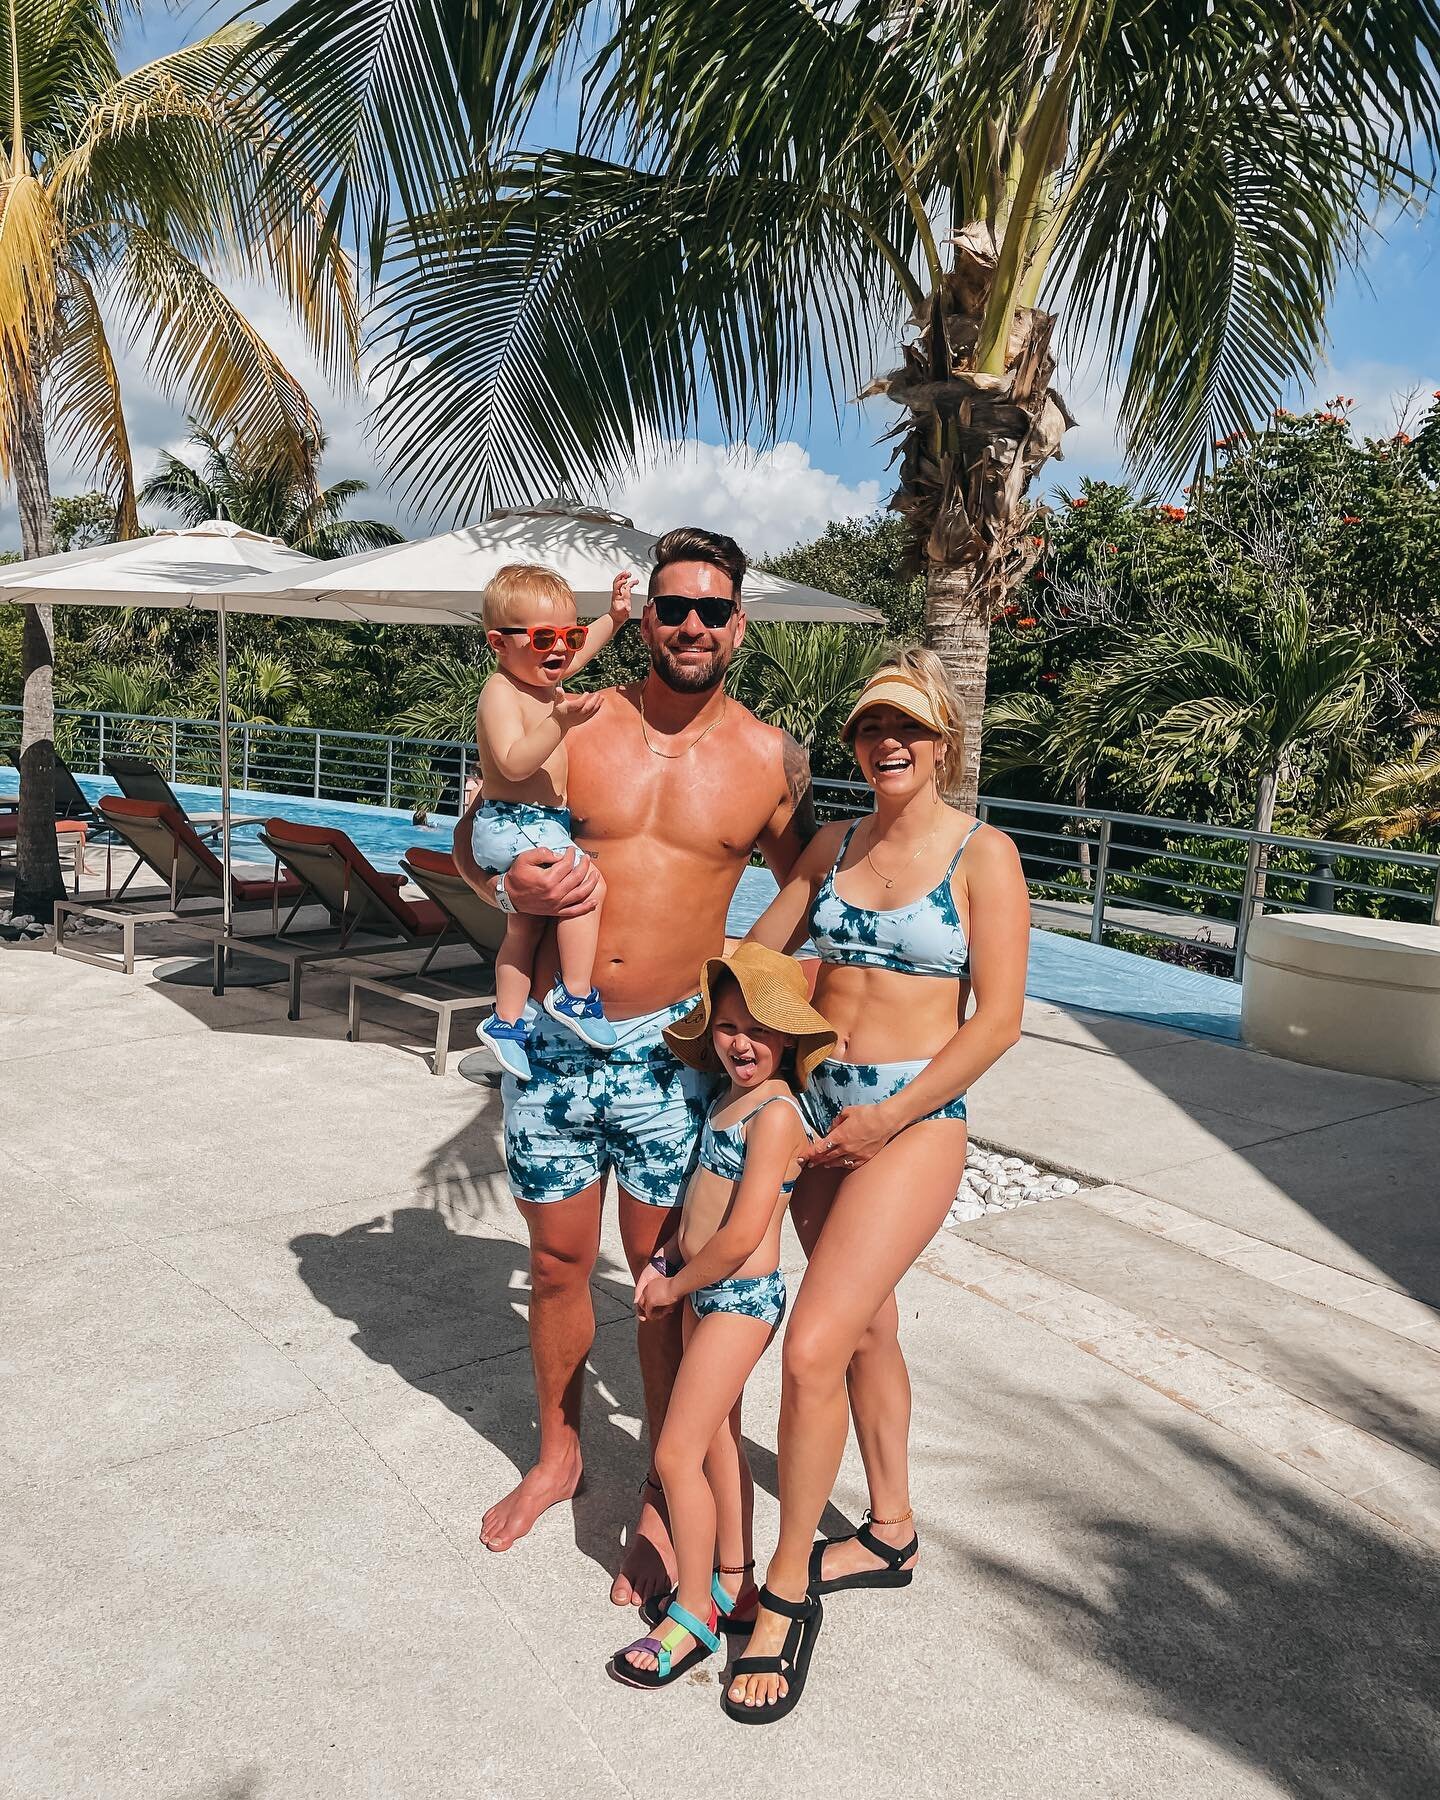 If you&rsquo;re looking for a kid friendly family vacation, this place is our go to! We were having too much fun to take pics of everything but there&rsquo;s a water park, arcades, so many pools and amazing restaurants, shows every night, and it&rsqu